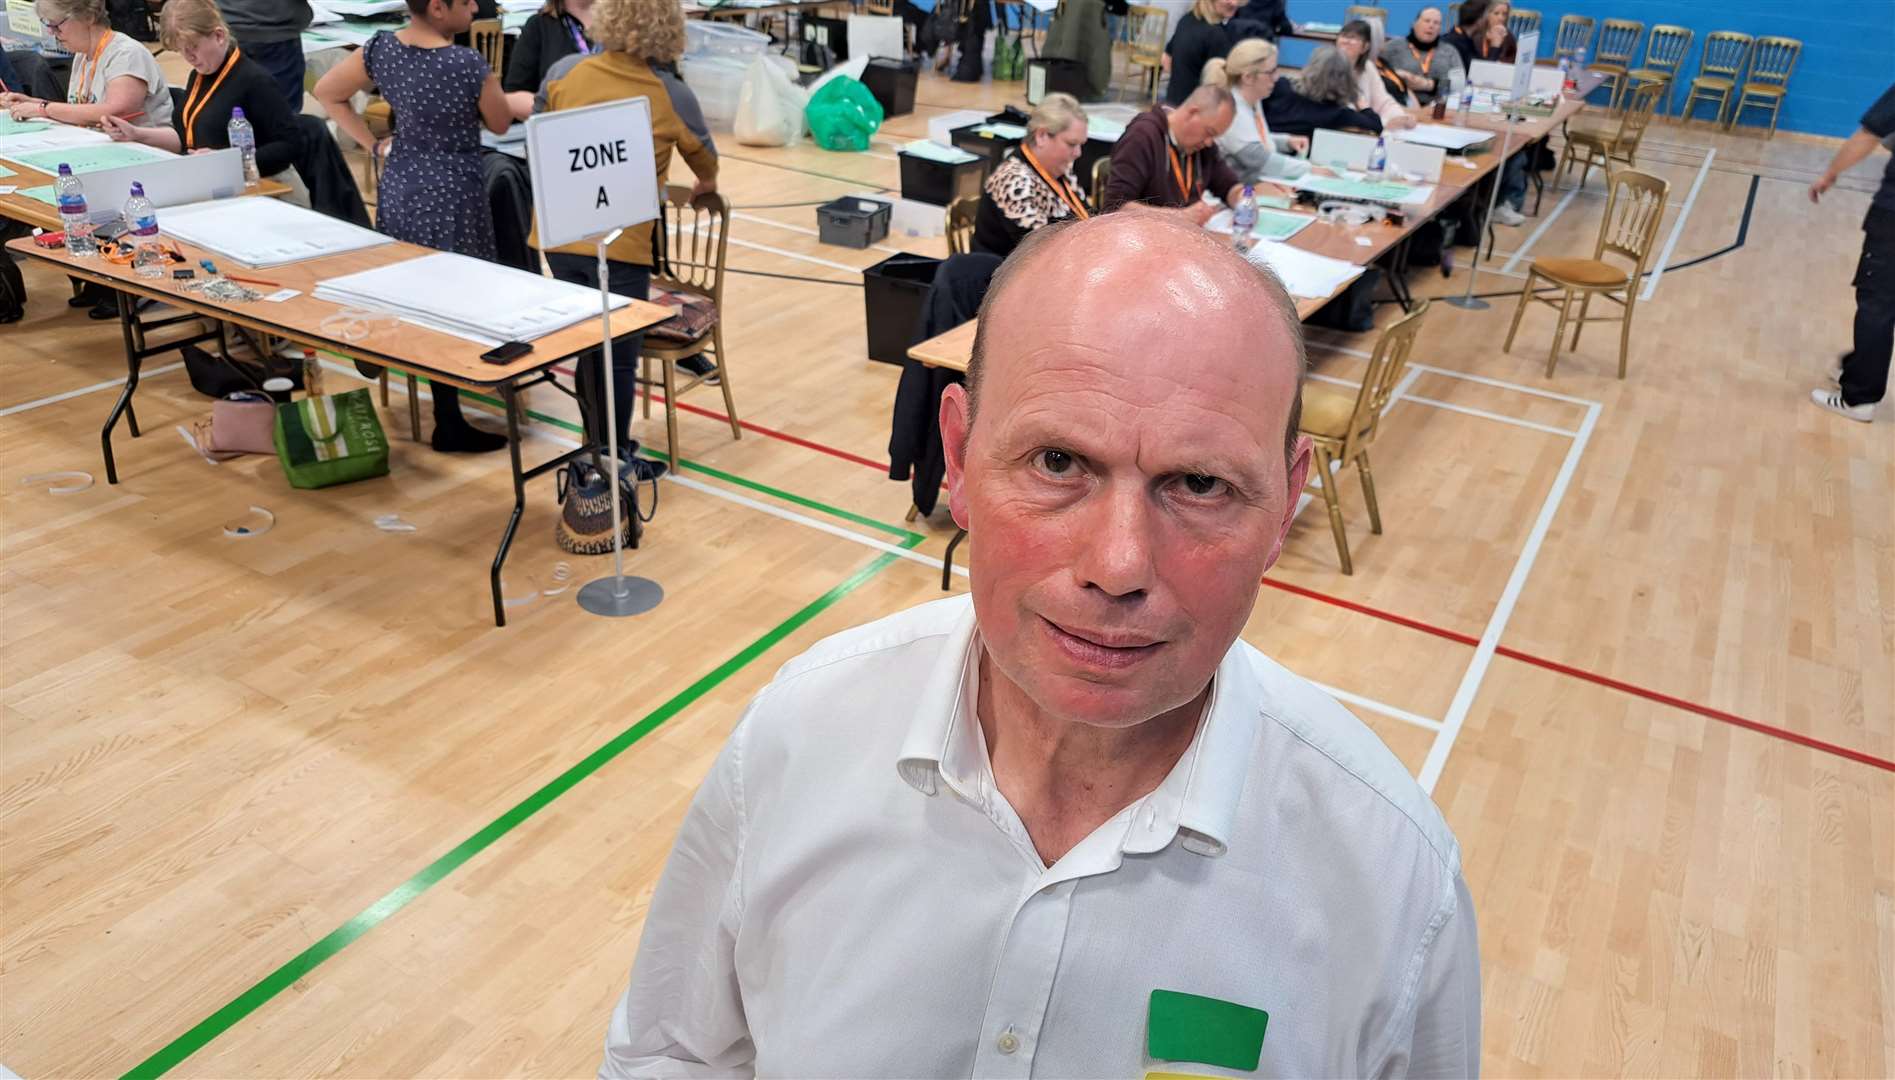 New independent councillor Mark Moorehouse